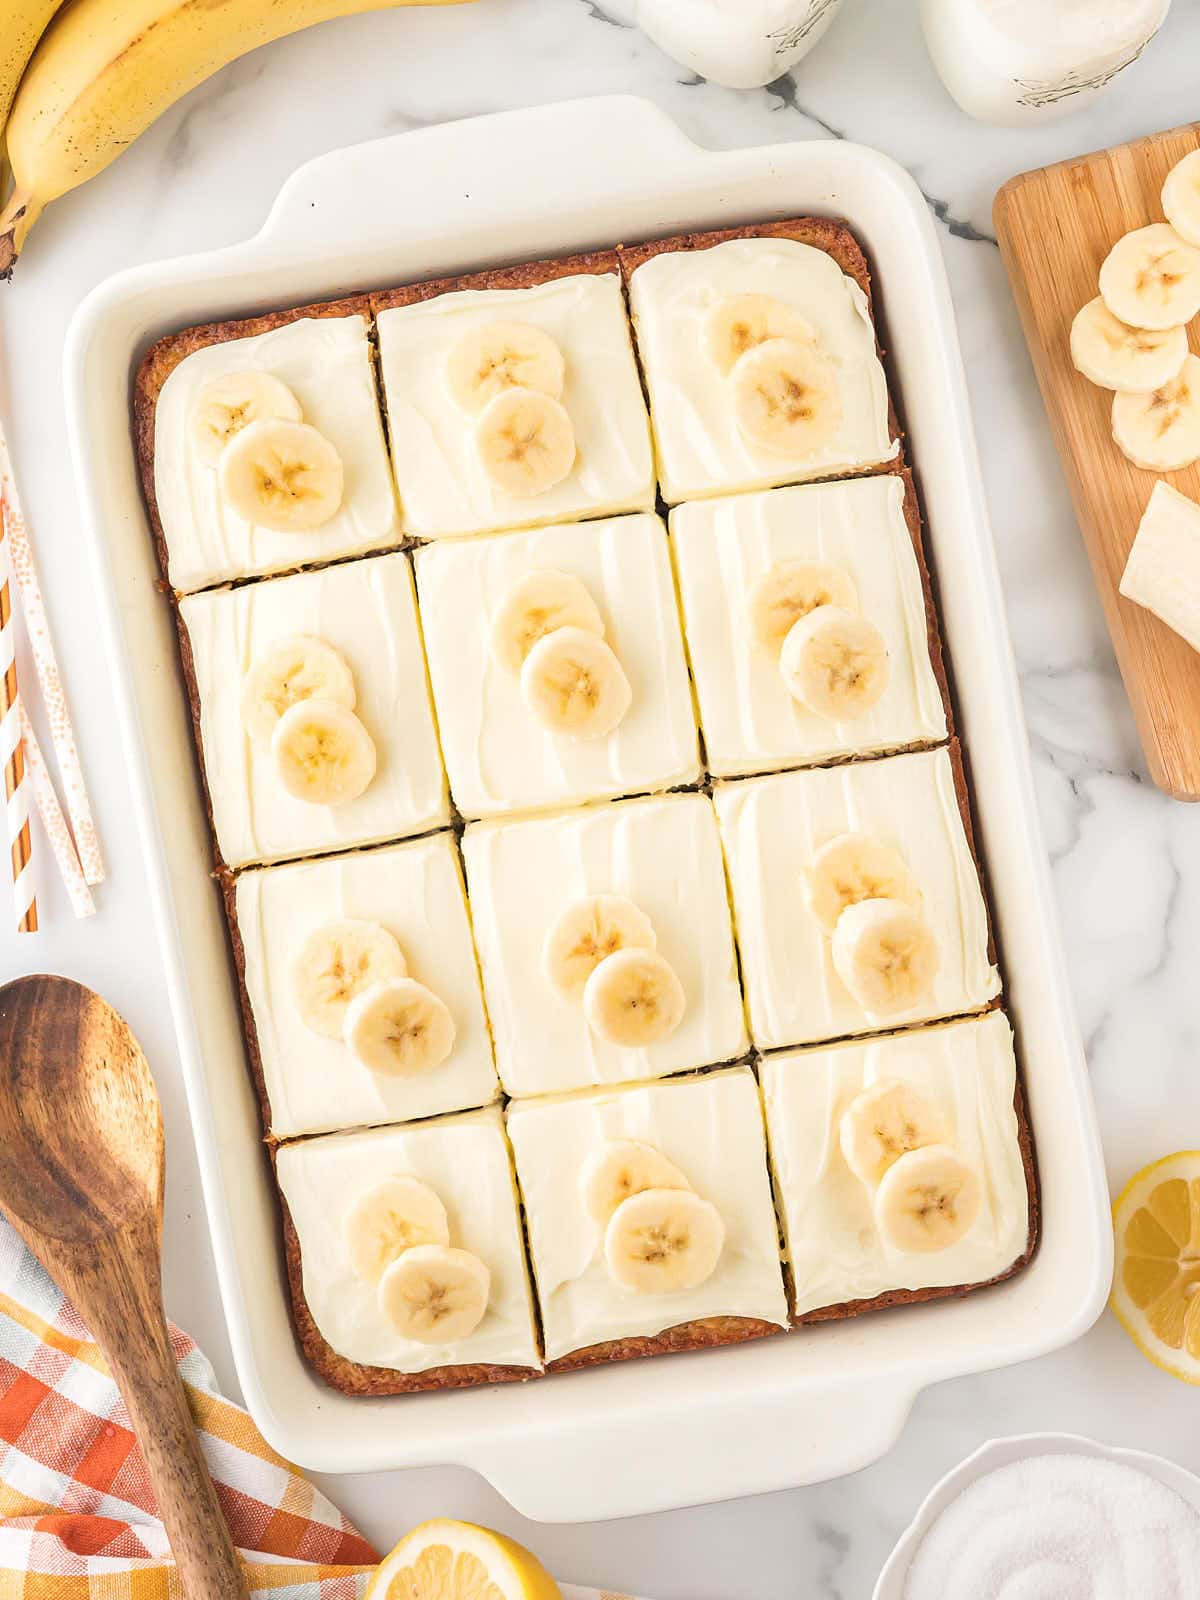 Top down-view of a Banana Cake with Cream Cheese Frosting  beautifully decorated with sliced bananas.